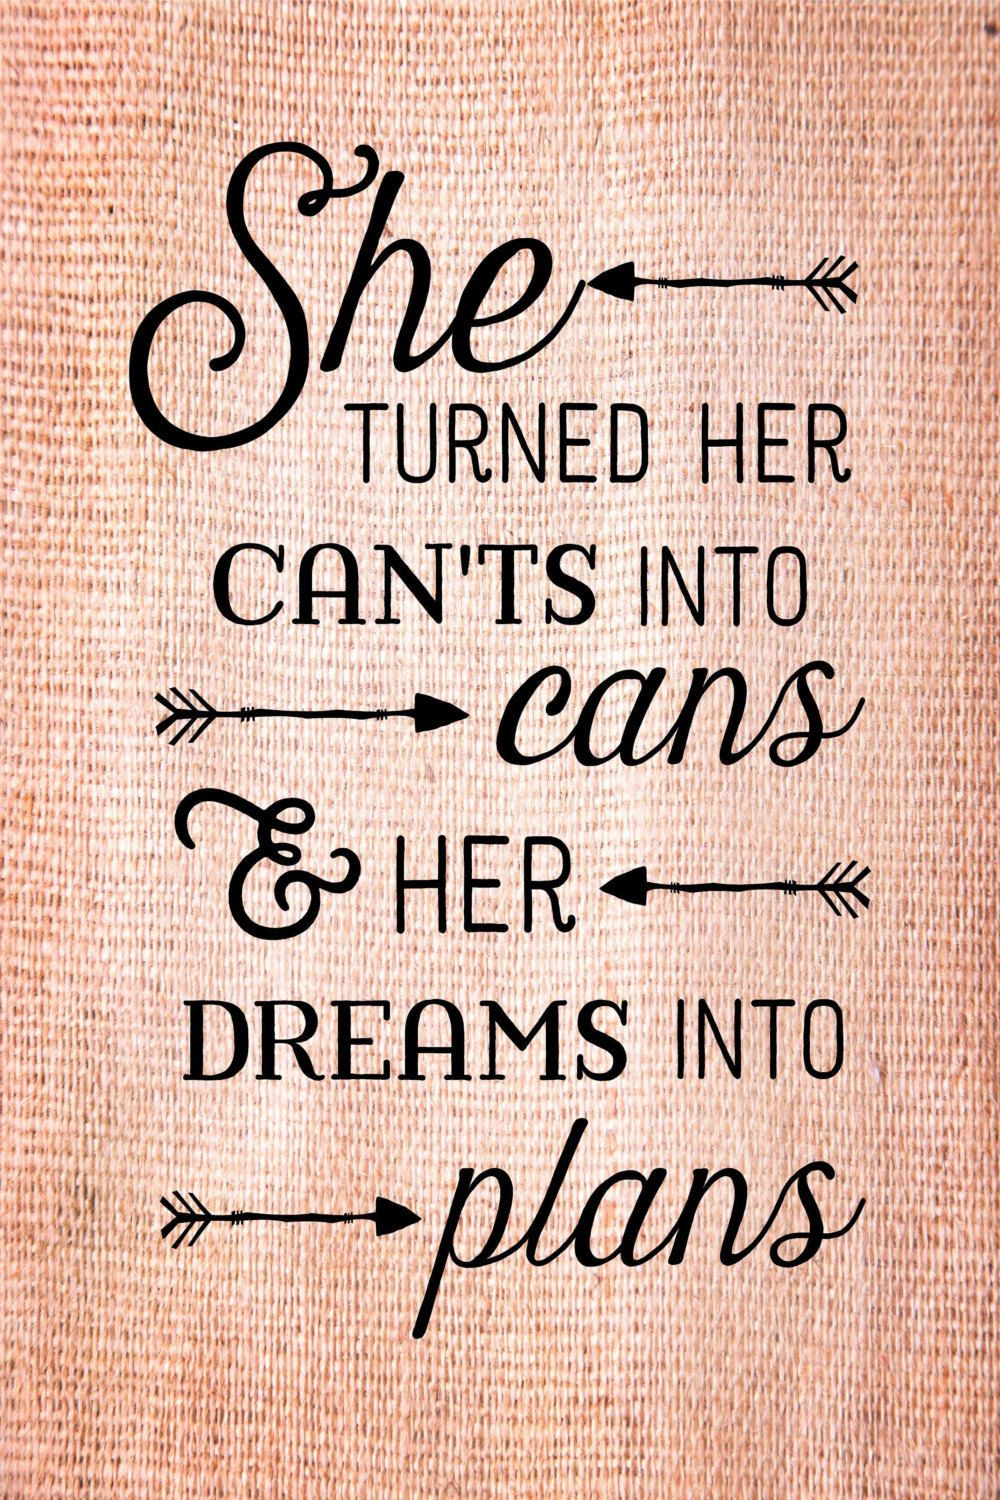 Inspirational Quotes Graduation
 Graduation Gift She turned her can ts into cans dreams